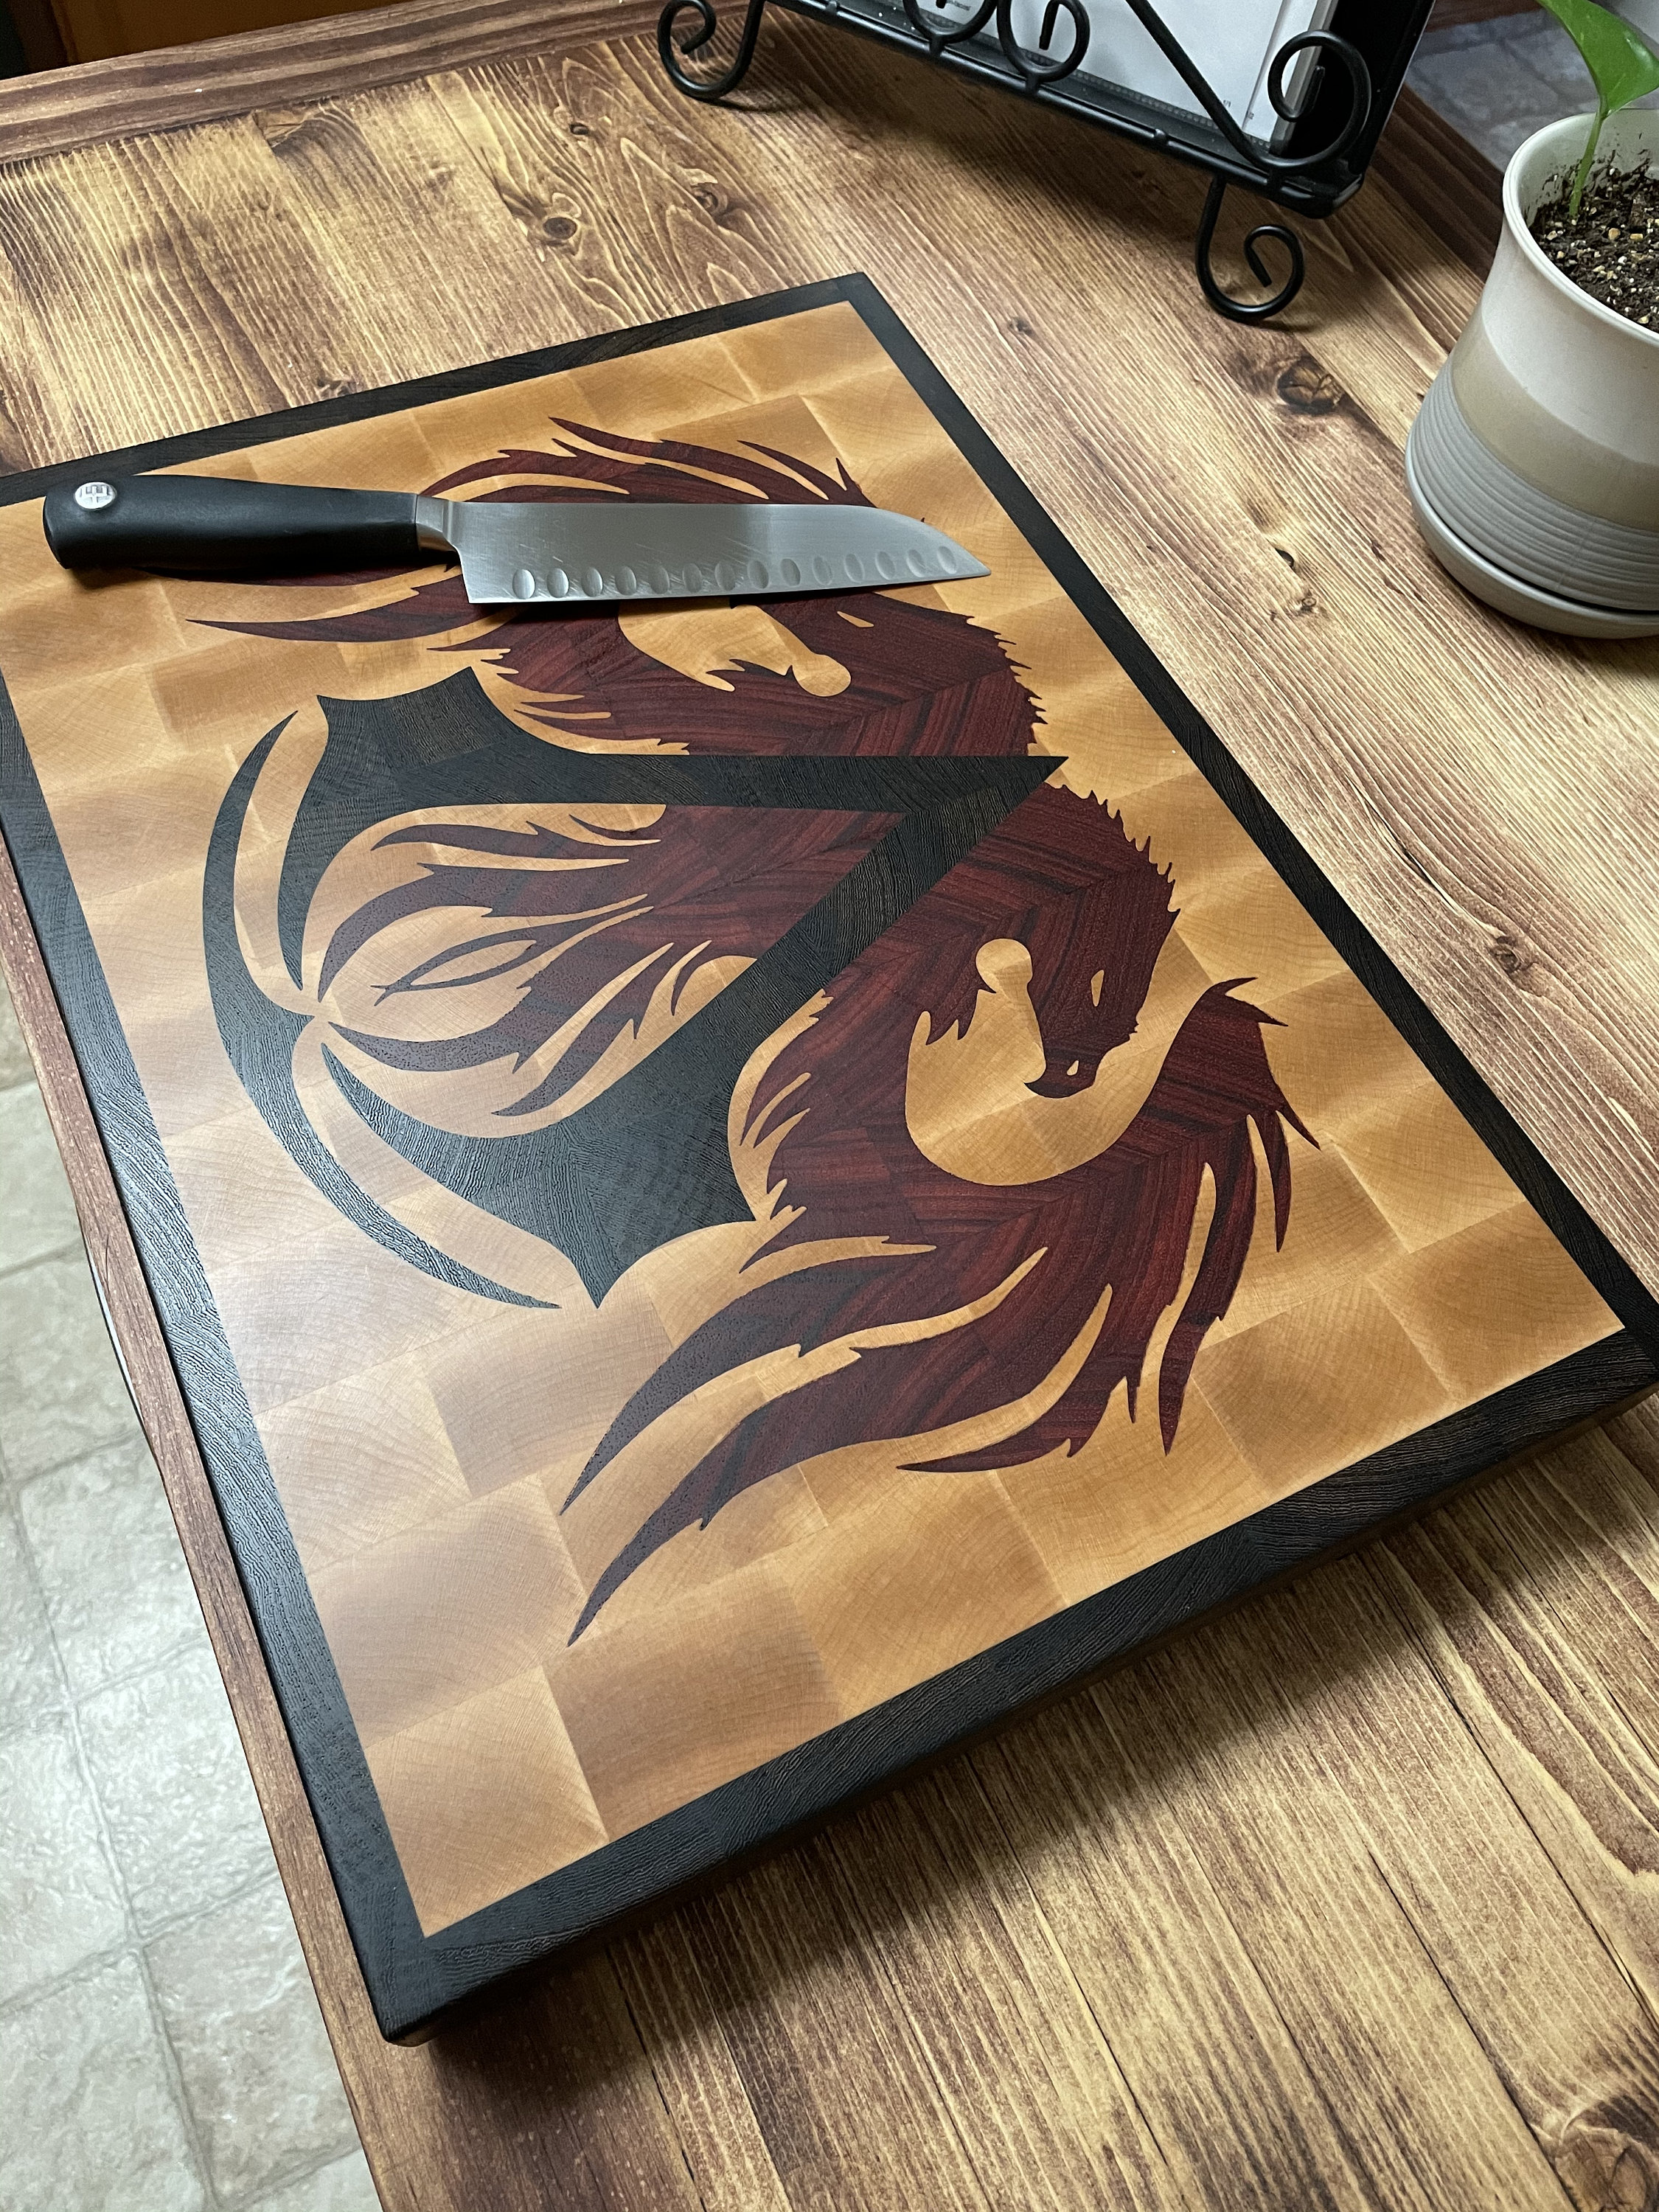 Inlay End Grain Boards – Lessons Learned